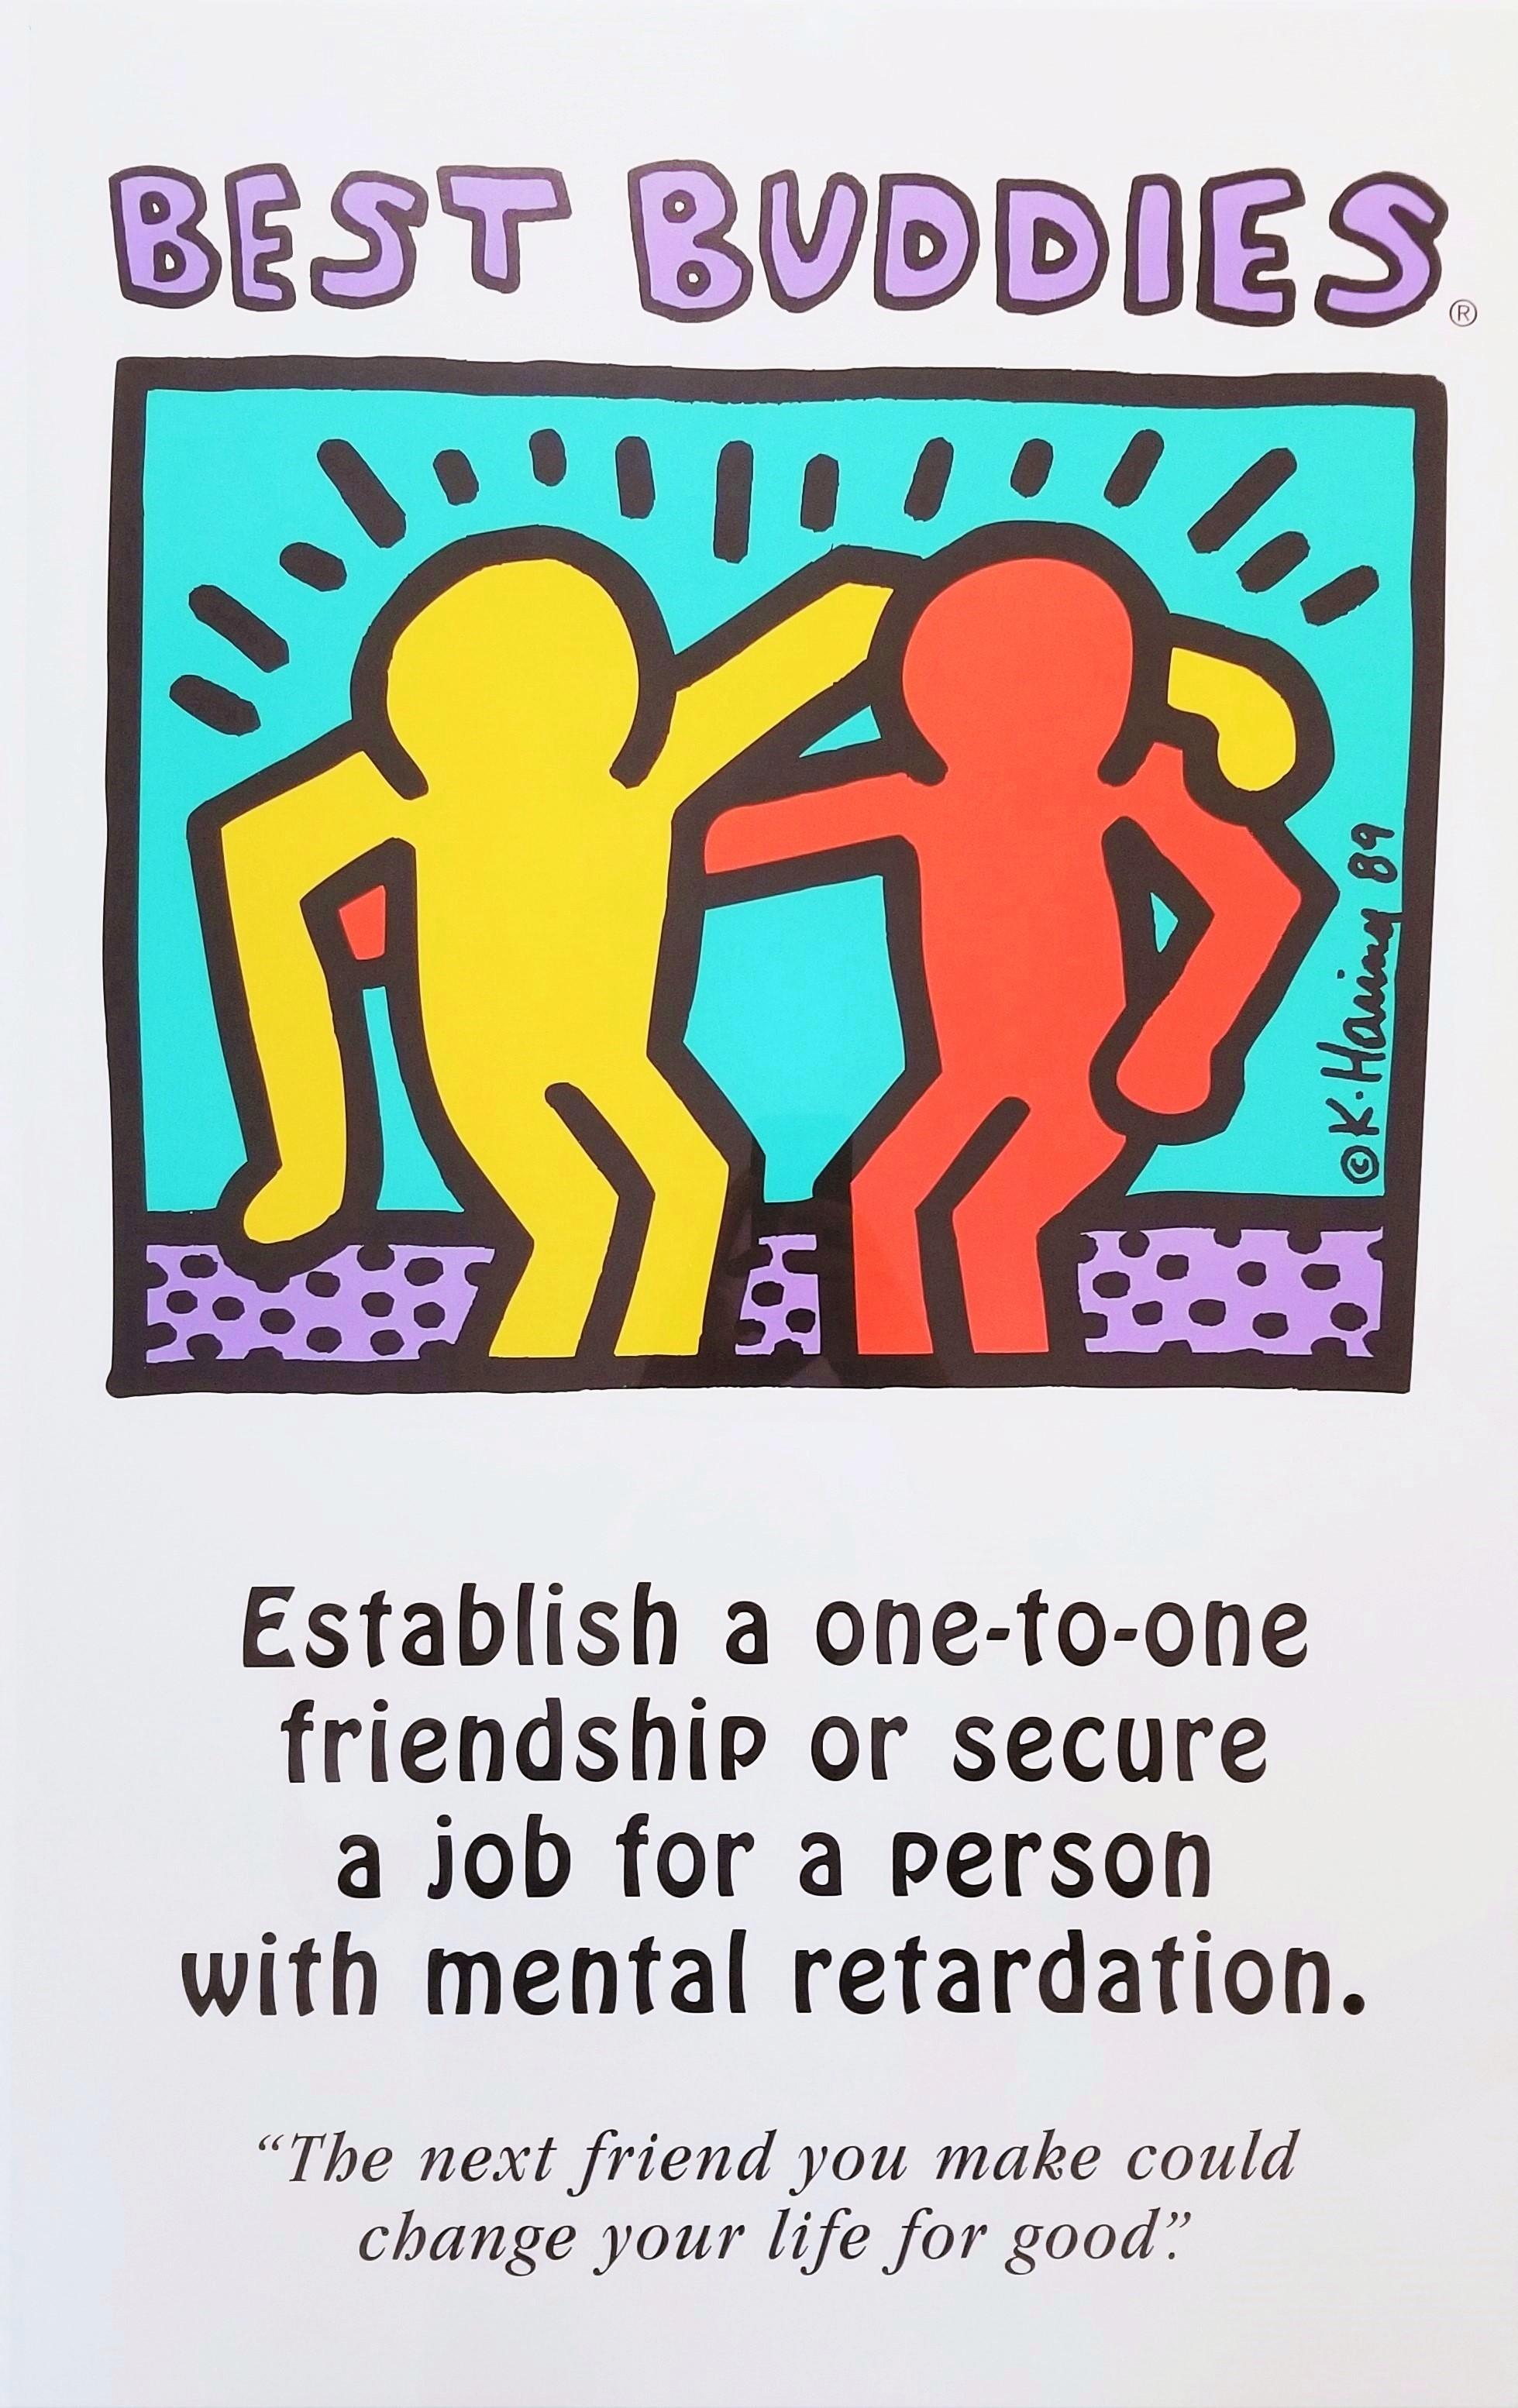 Artist: (after) Keith Haring (American, 1958-1990)
Title: "Best Buddies"
*Issued unsigned, though signed and dated by Haring in the plate (printed signature) center right
Year: 1989
Medium: Original Offset-Lithograph, Poster on light smooth wove